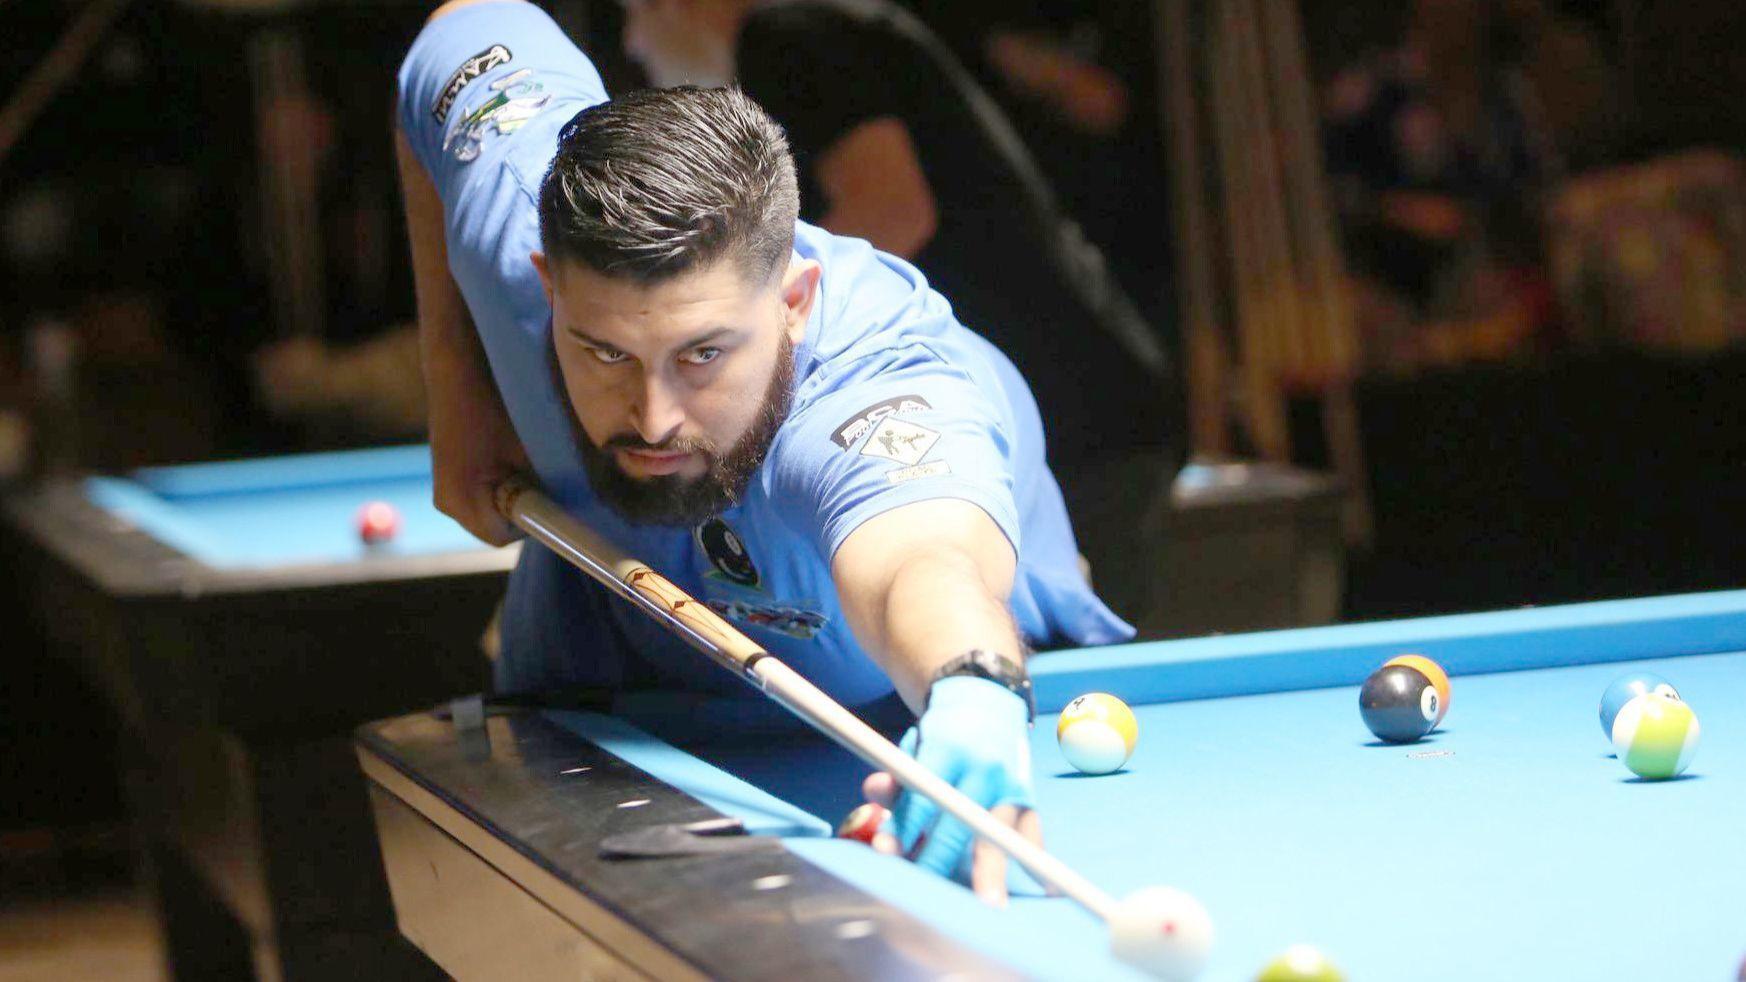 BCA Billiards Vegas Logo - Ramona pool team claims prize in world competition